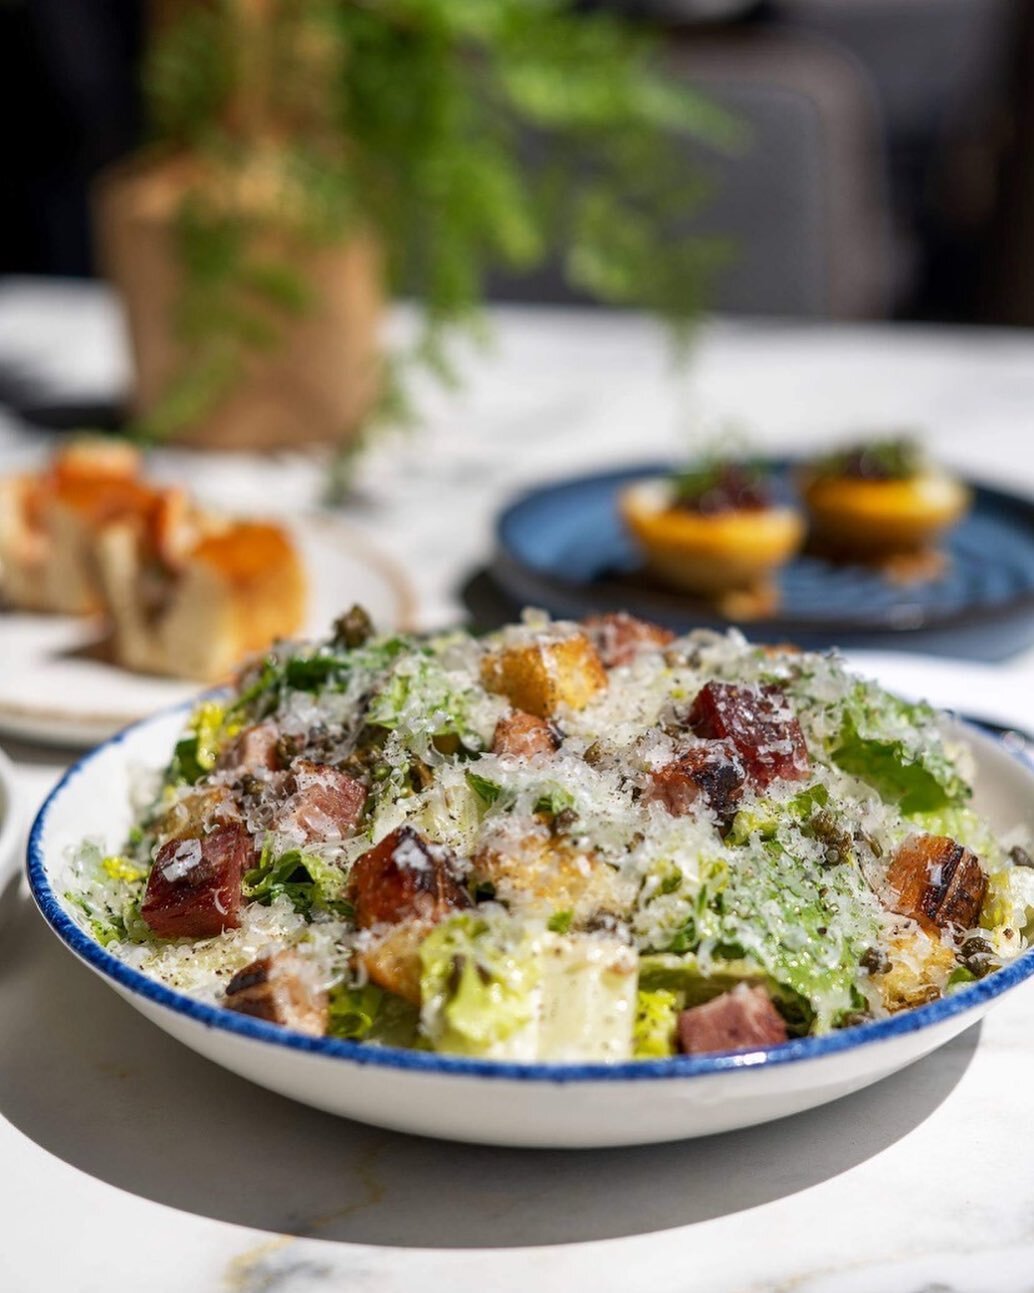 When was the last time you had a Caesar Salad? I mean, a proper Caesar Salad, the kind we used to order? I bet, not in decades. Sometimes I just love a classic &mdash;&nbsp;I still wear Rocabar, after all &mdash; and this lives up to the best I've ha